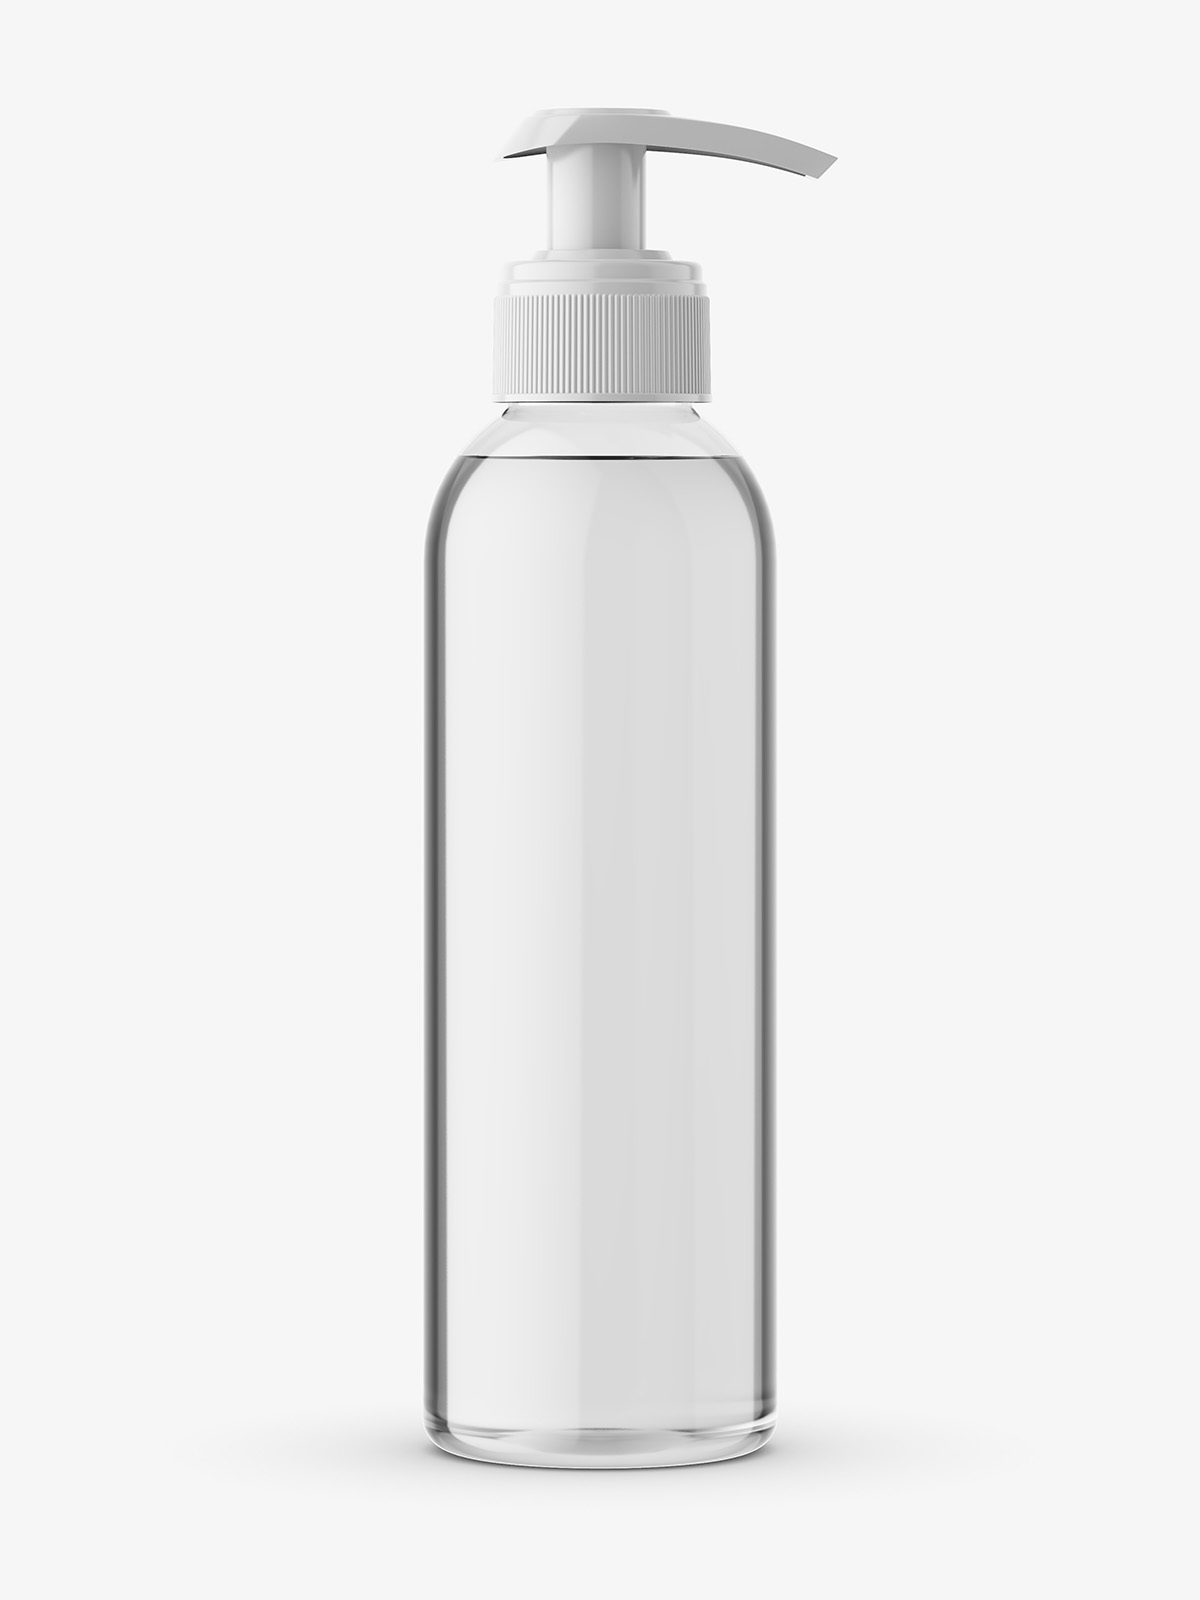 Download Transparent Cosmetic Bottle With Pump Mockup Smarty Mockups